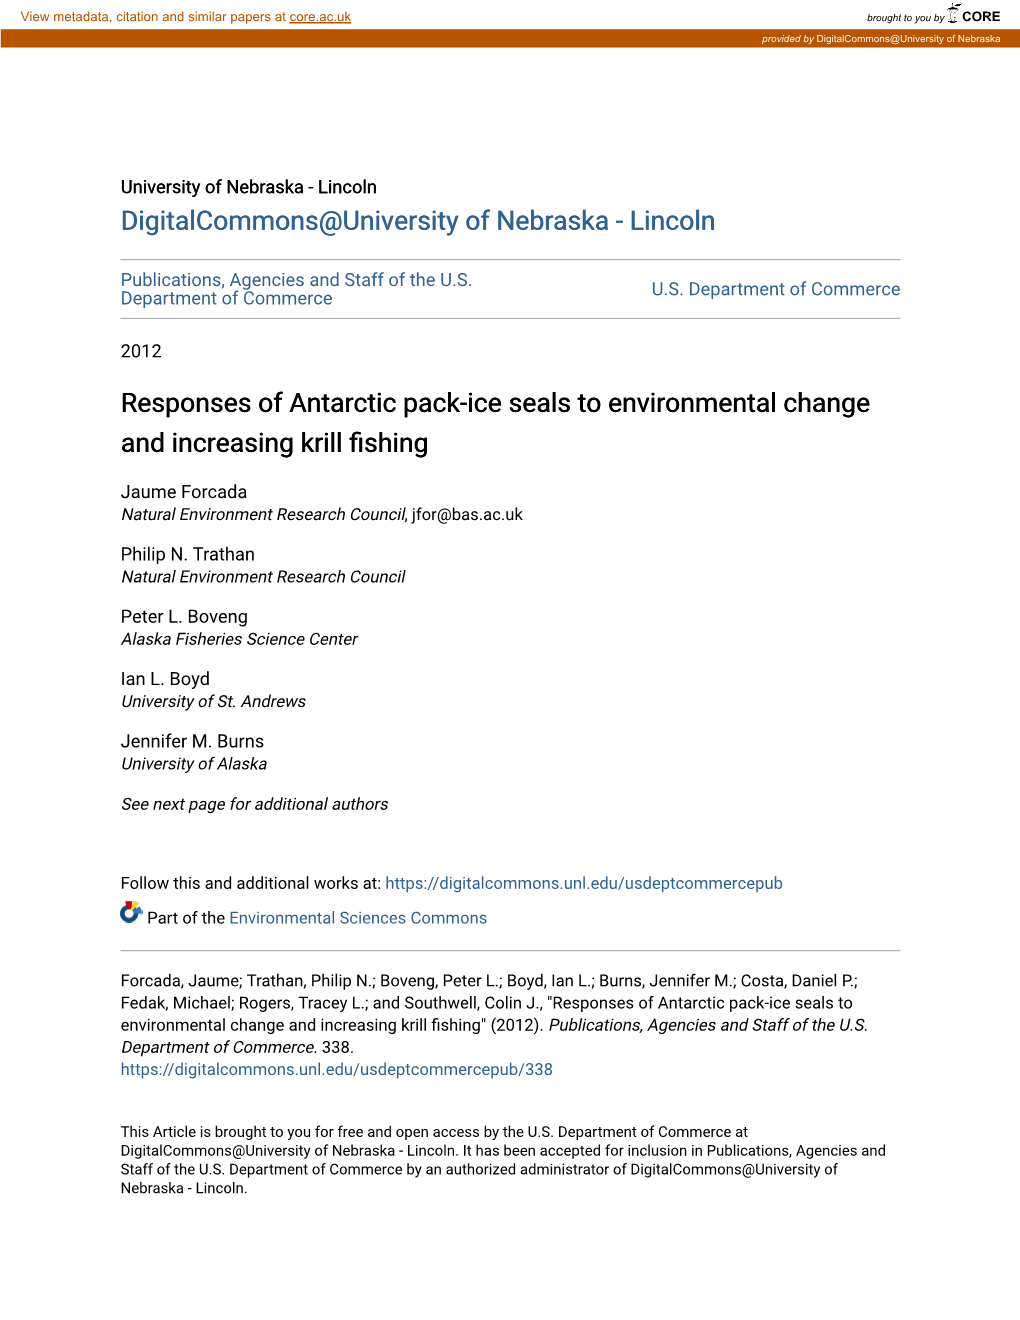 Responses of Antarctic Pack-Ice Seals to Environmental Change and Increasing Krill Fishing